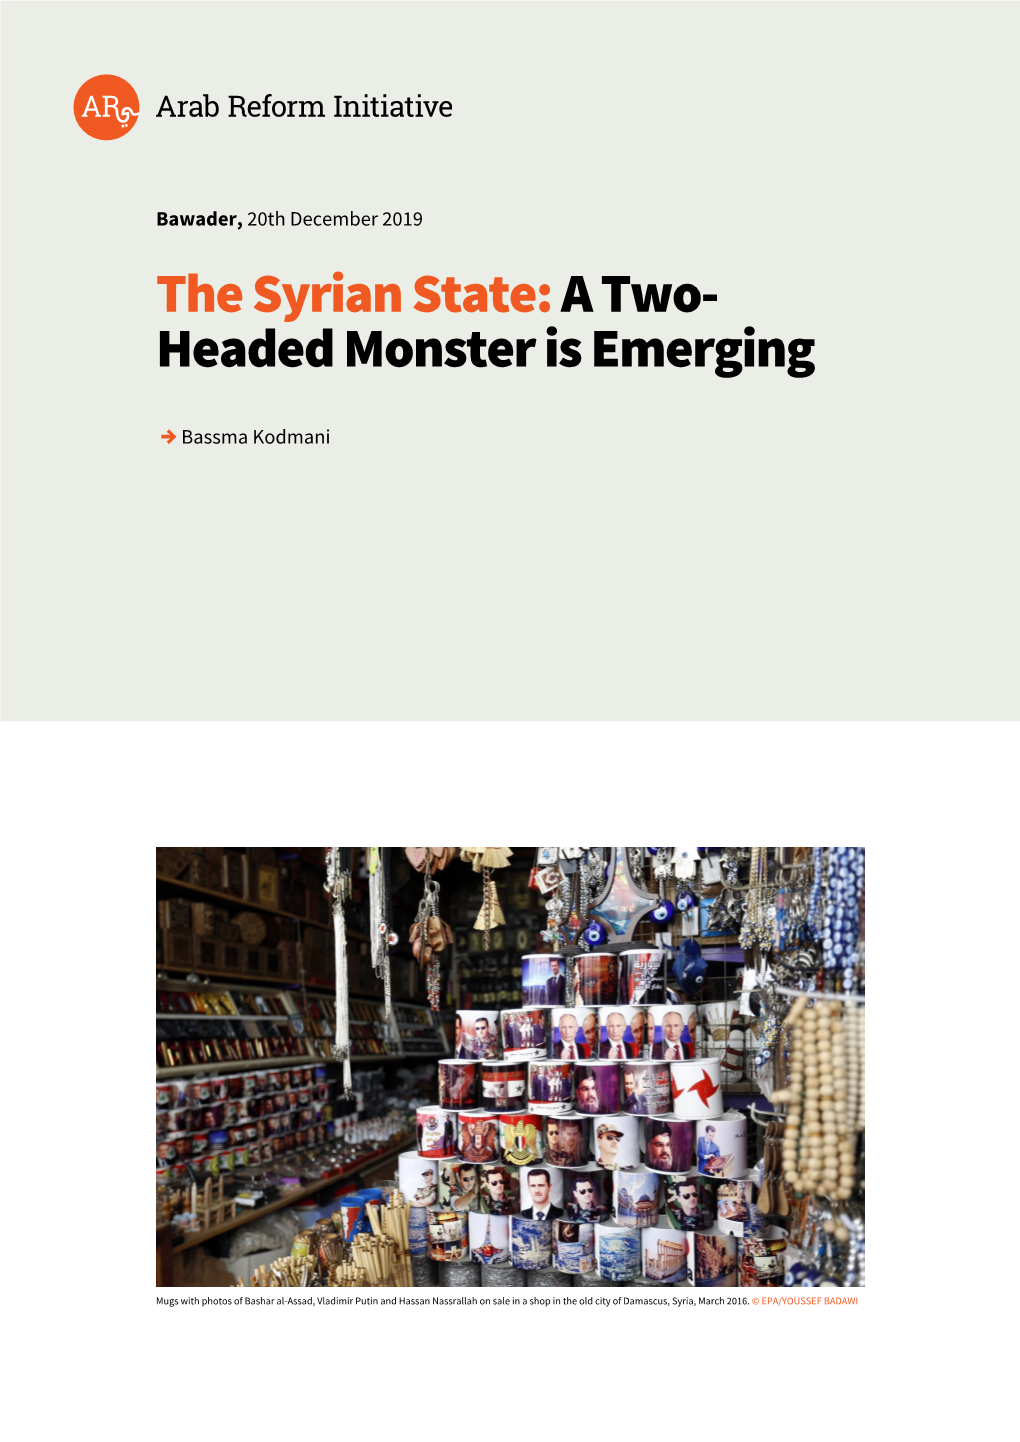 The Syrian State: a Two- Headed Monster Is Emerging